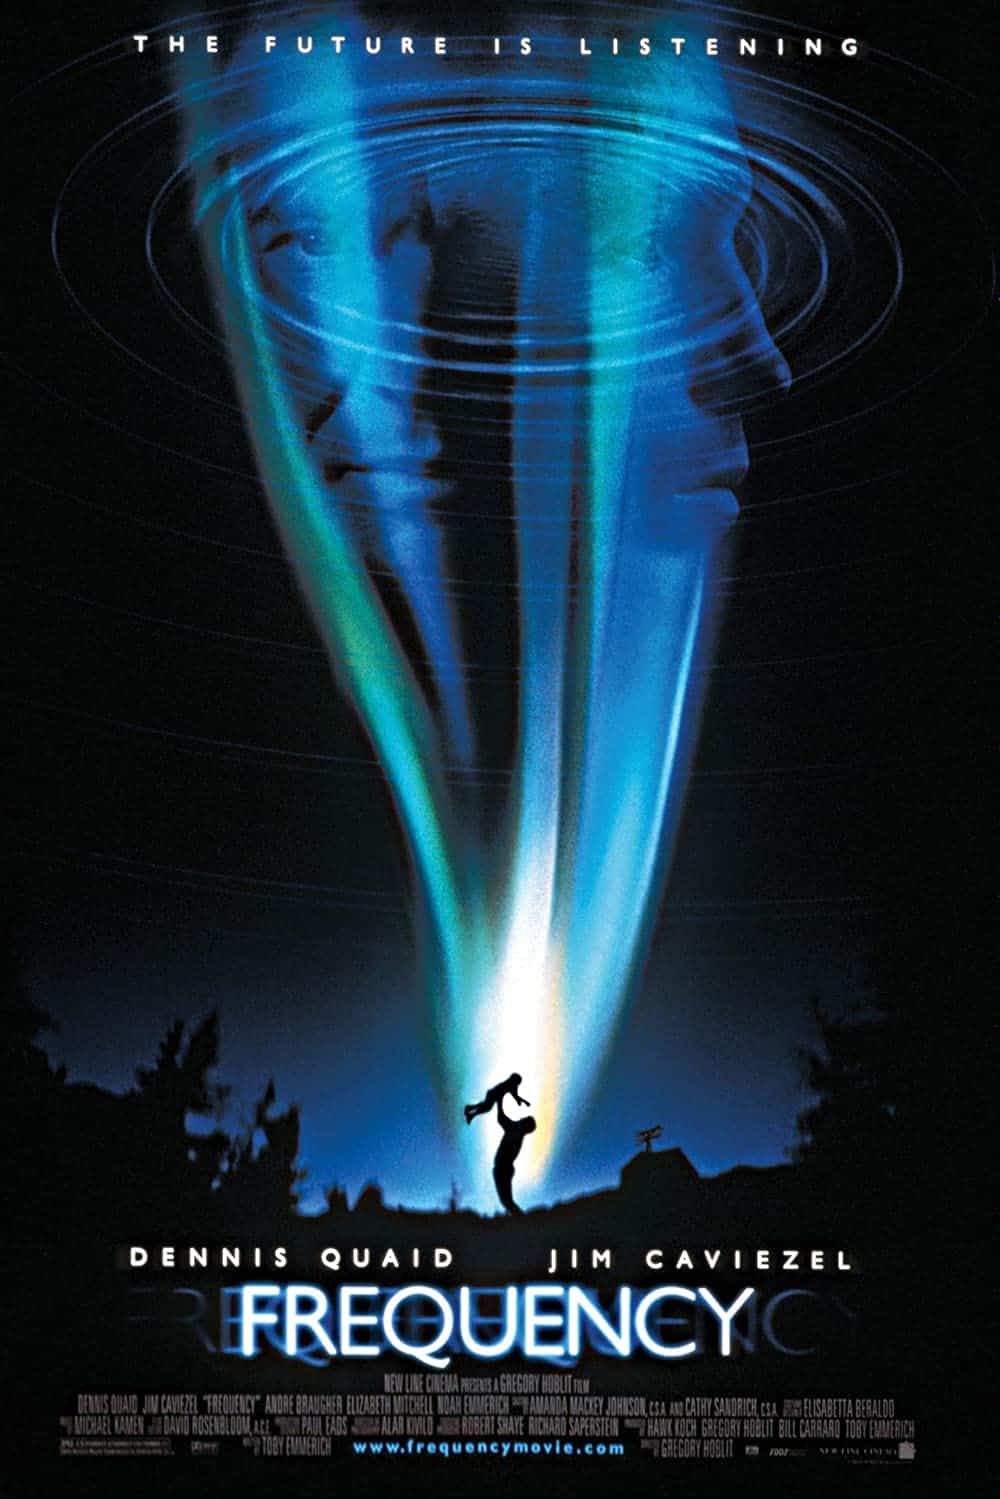 Frequency (2000) Best Father-Son Movies to Add in Your Watchlist